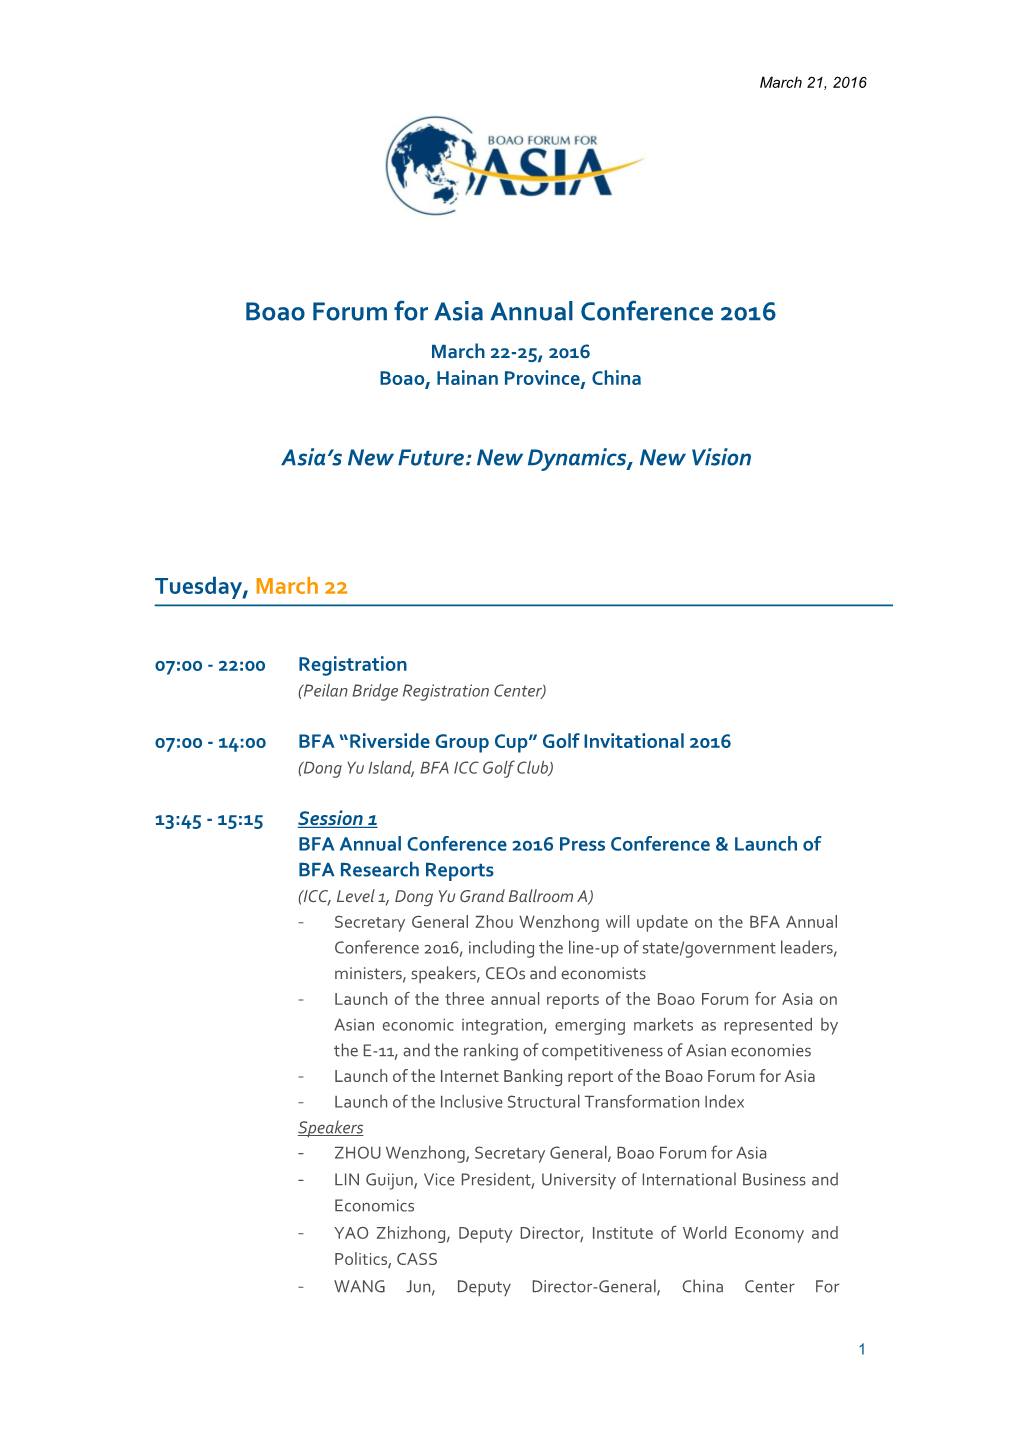 Boao Forum for Asia Annual Conference 2016 March 22-25, 2016 Boao, Hainan Province, China